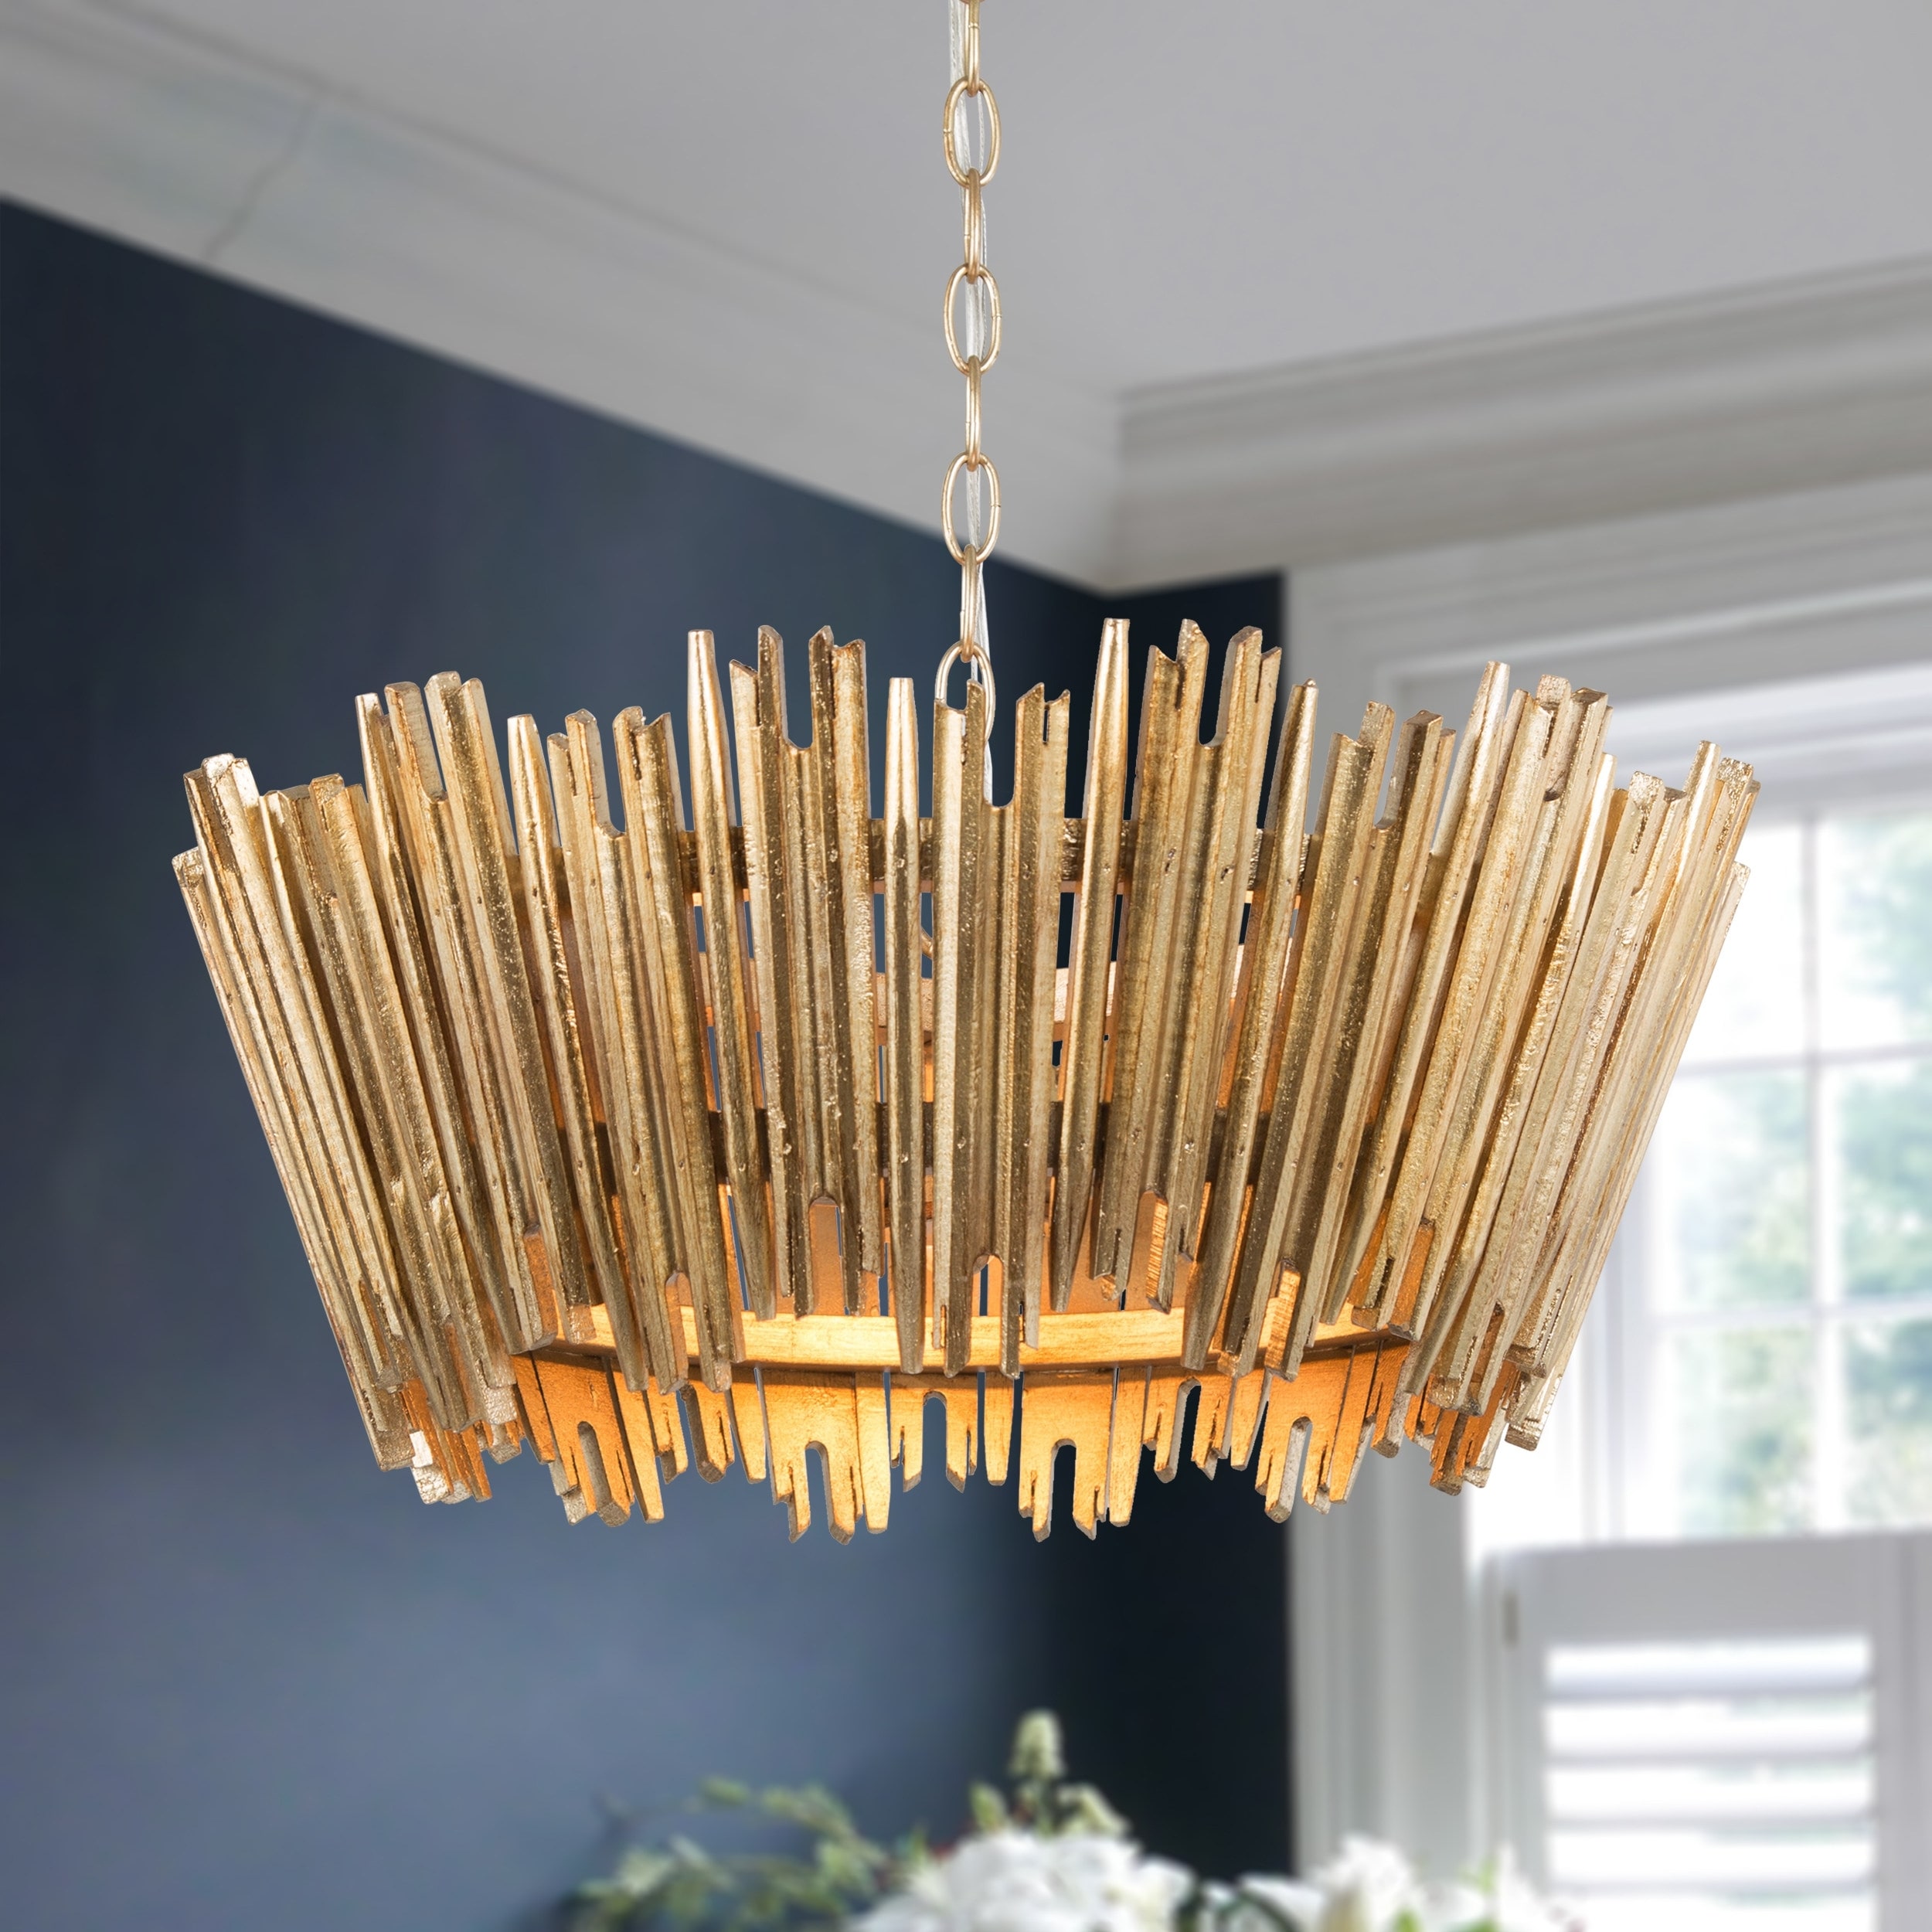 https://ak1.ostkcdn.com/images/products/is/images/direct/9a10ef4bd8a935c20f44d2e73ff1f3c8526a9608/Mid-century-Modern-Drum-Chandelier-3-Light-Wood-Cage-French-Country-Artistic-Handmade-Dining-Room-Lights.jpg